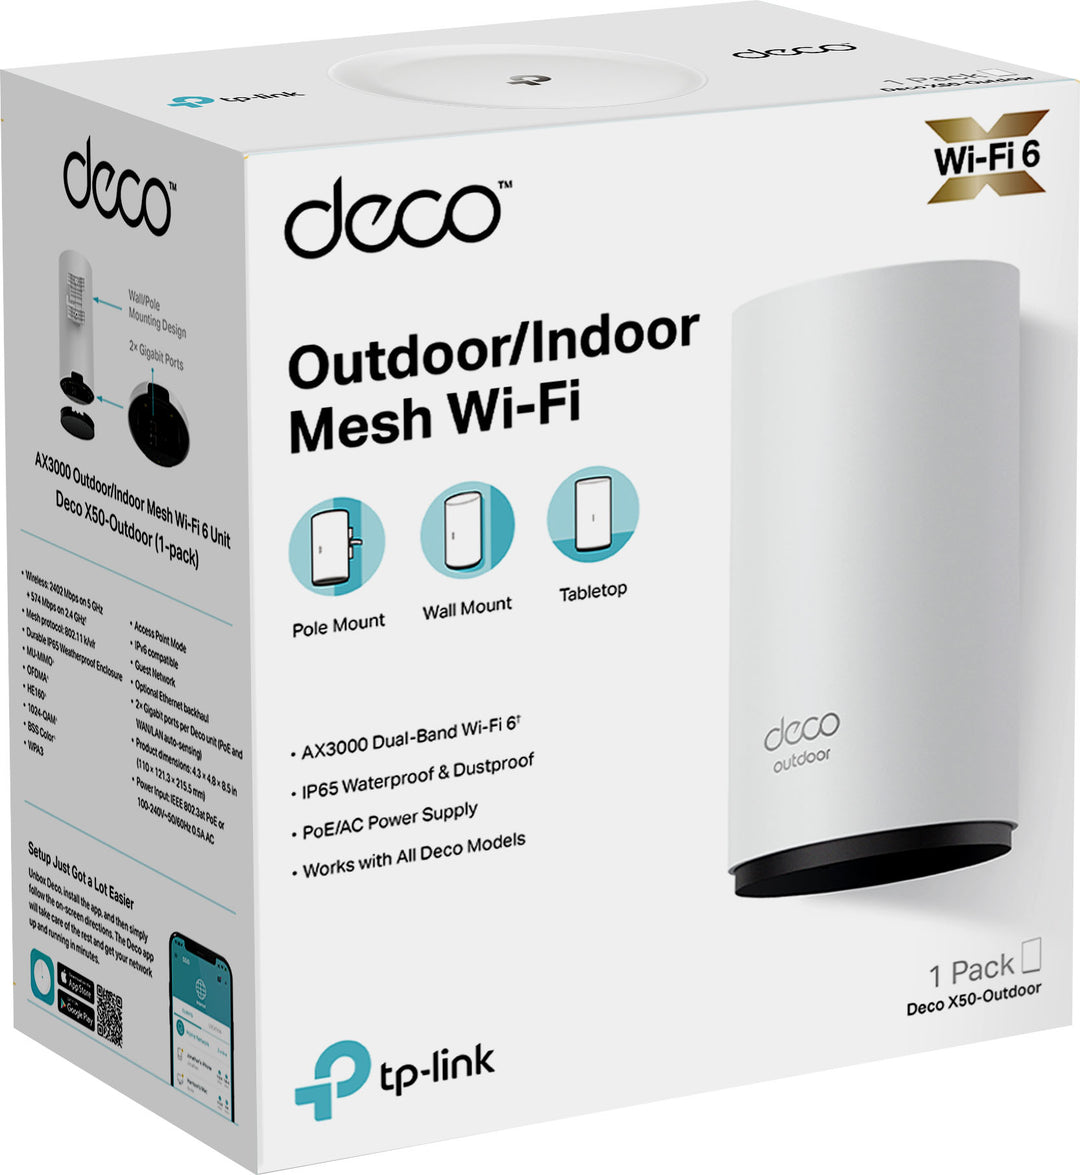 TP-Link - Deco X50 Outdoor AX3000 Dual-Band Mesh Wi-Fi- 6 Router - White_7